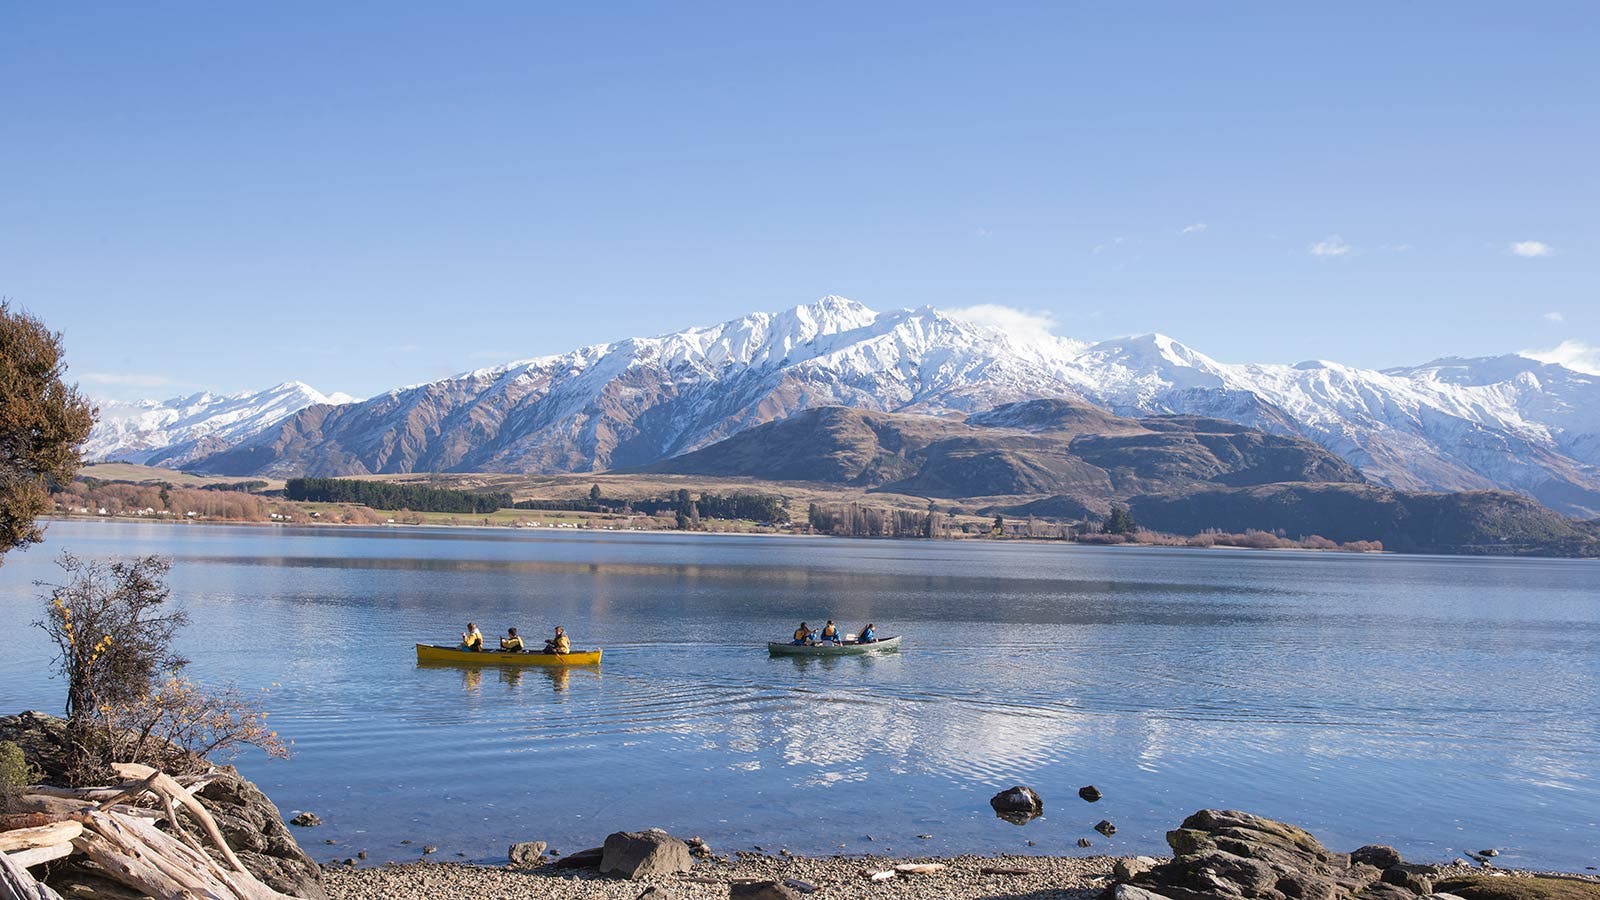 People canoeing in New Zealand river